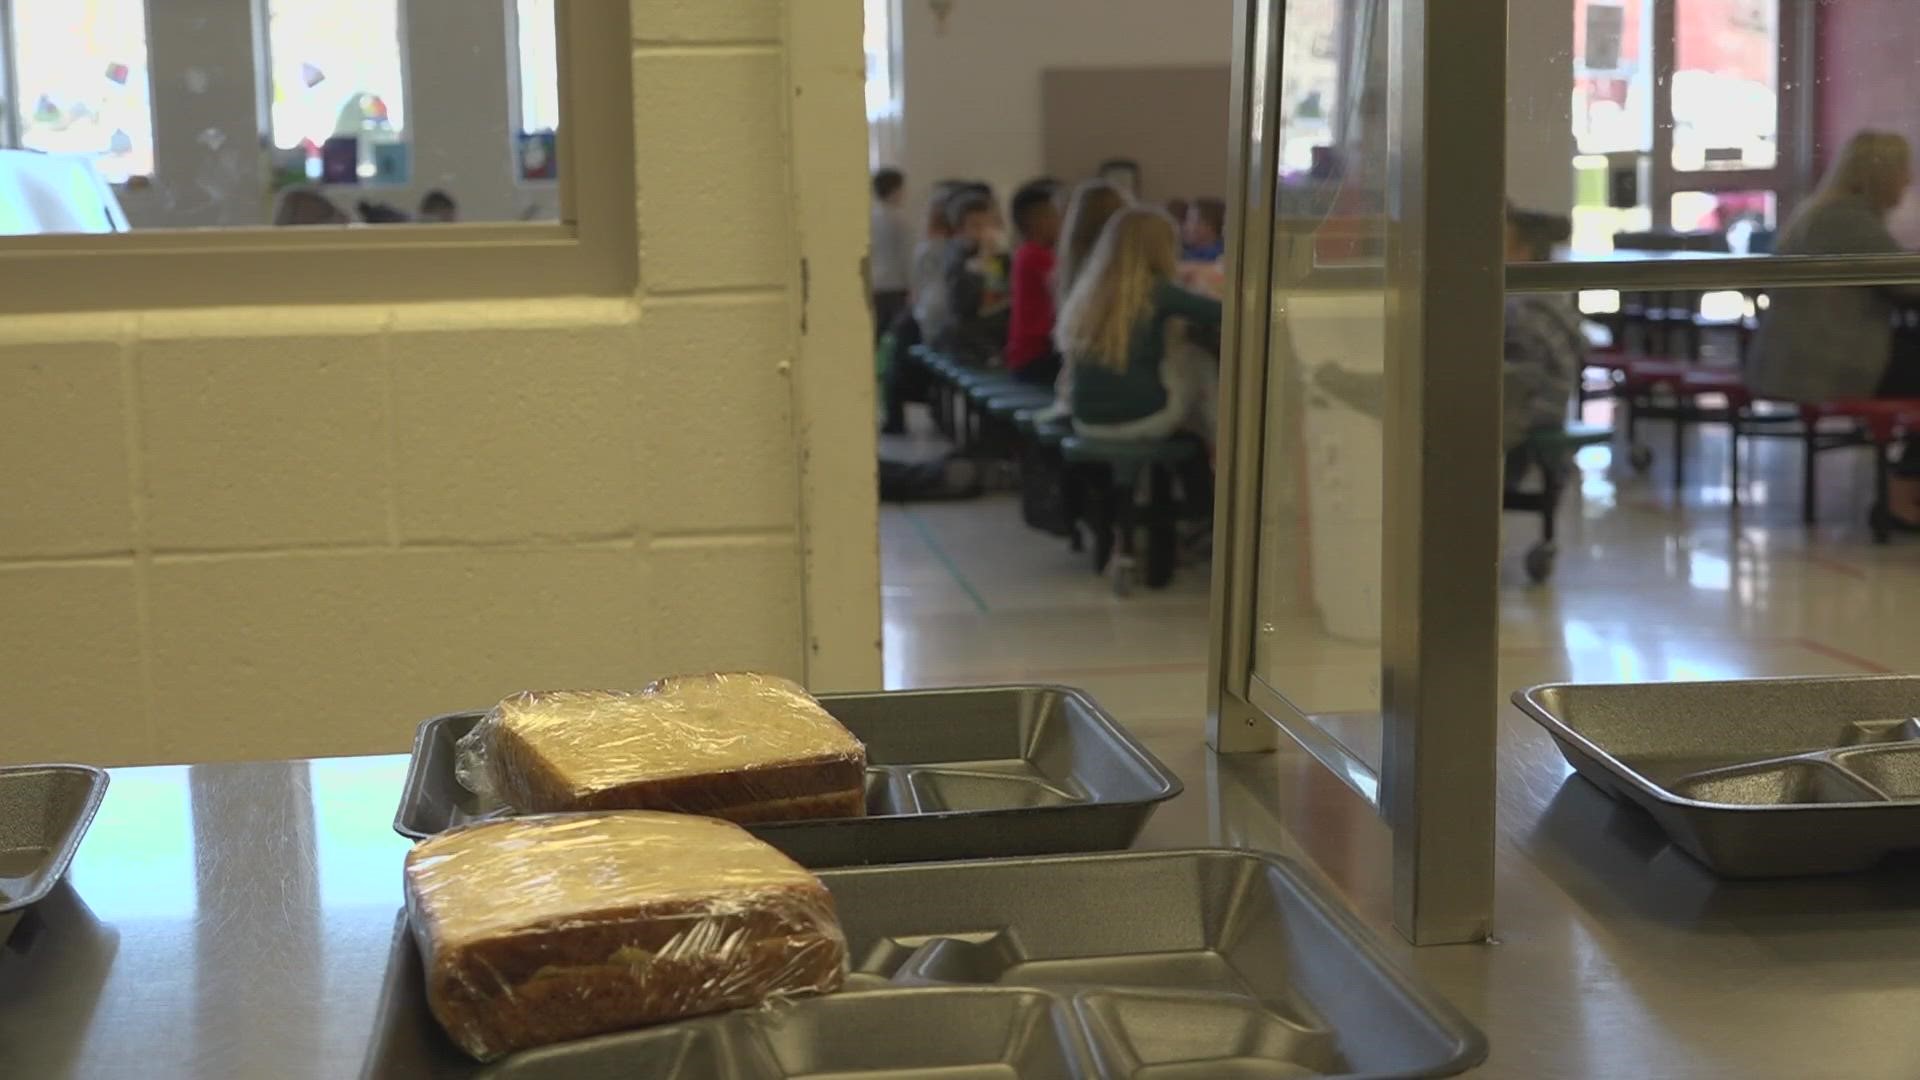 Superintendent Kenneth Roumpos said students need the help now more than ever. It costs $50 to provide lunch for a month, but even $5 can help with a meal.